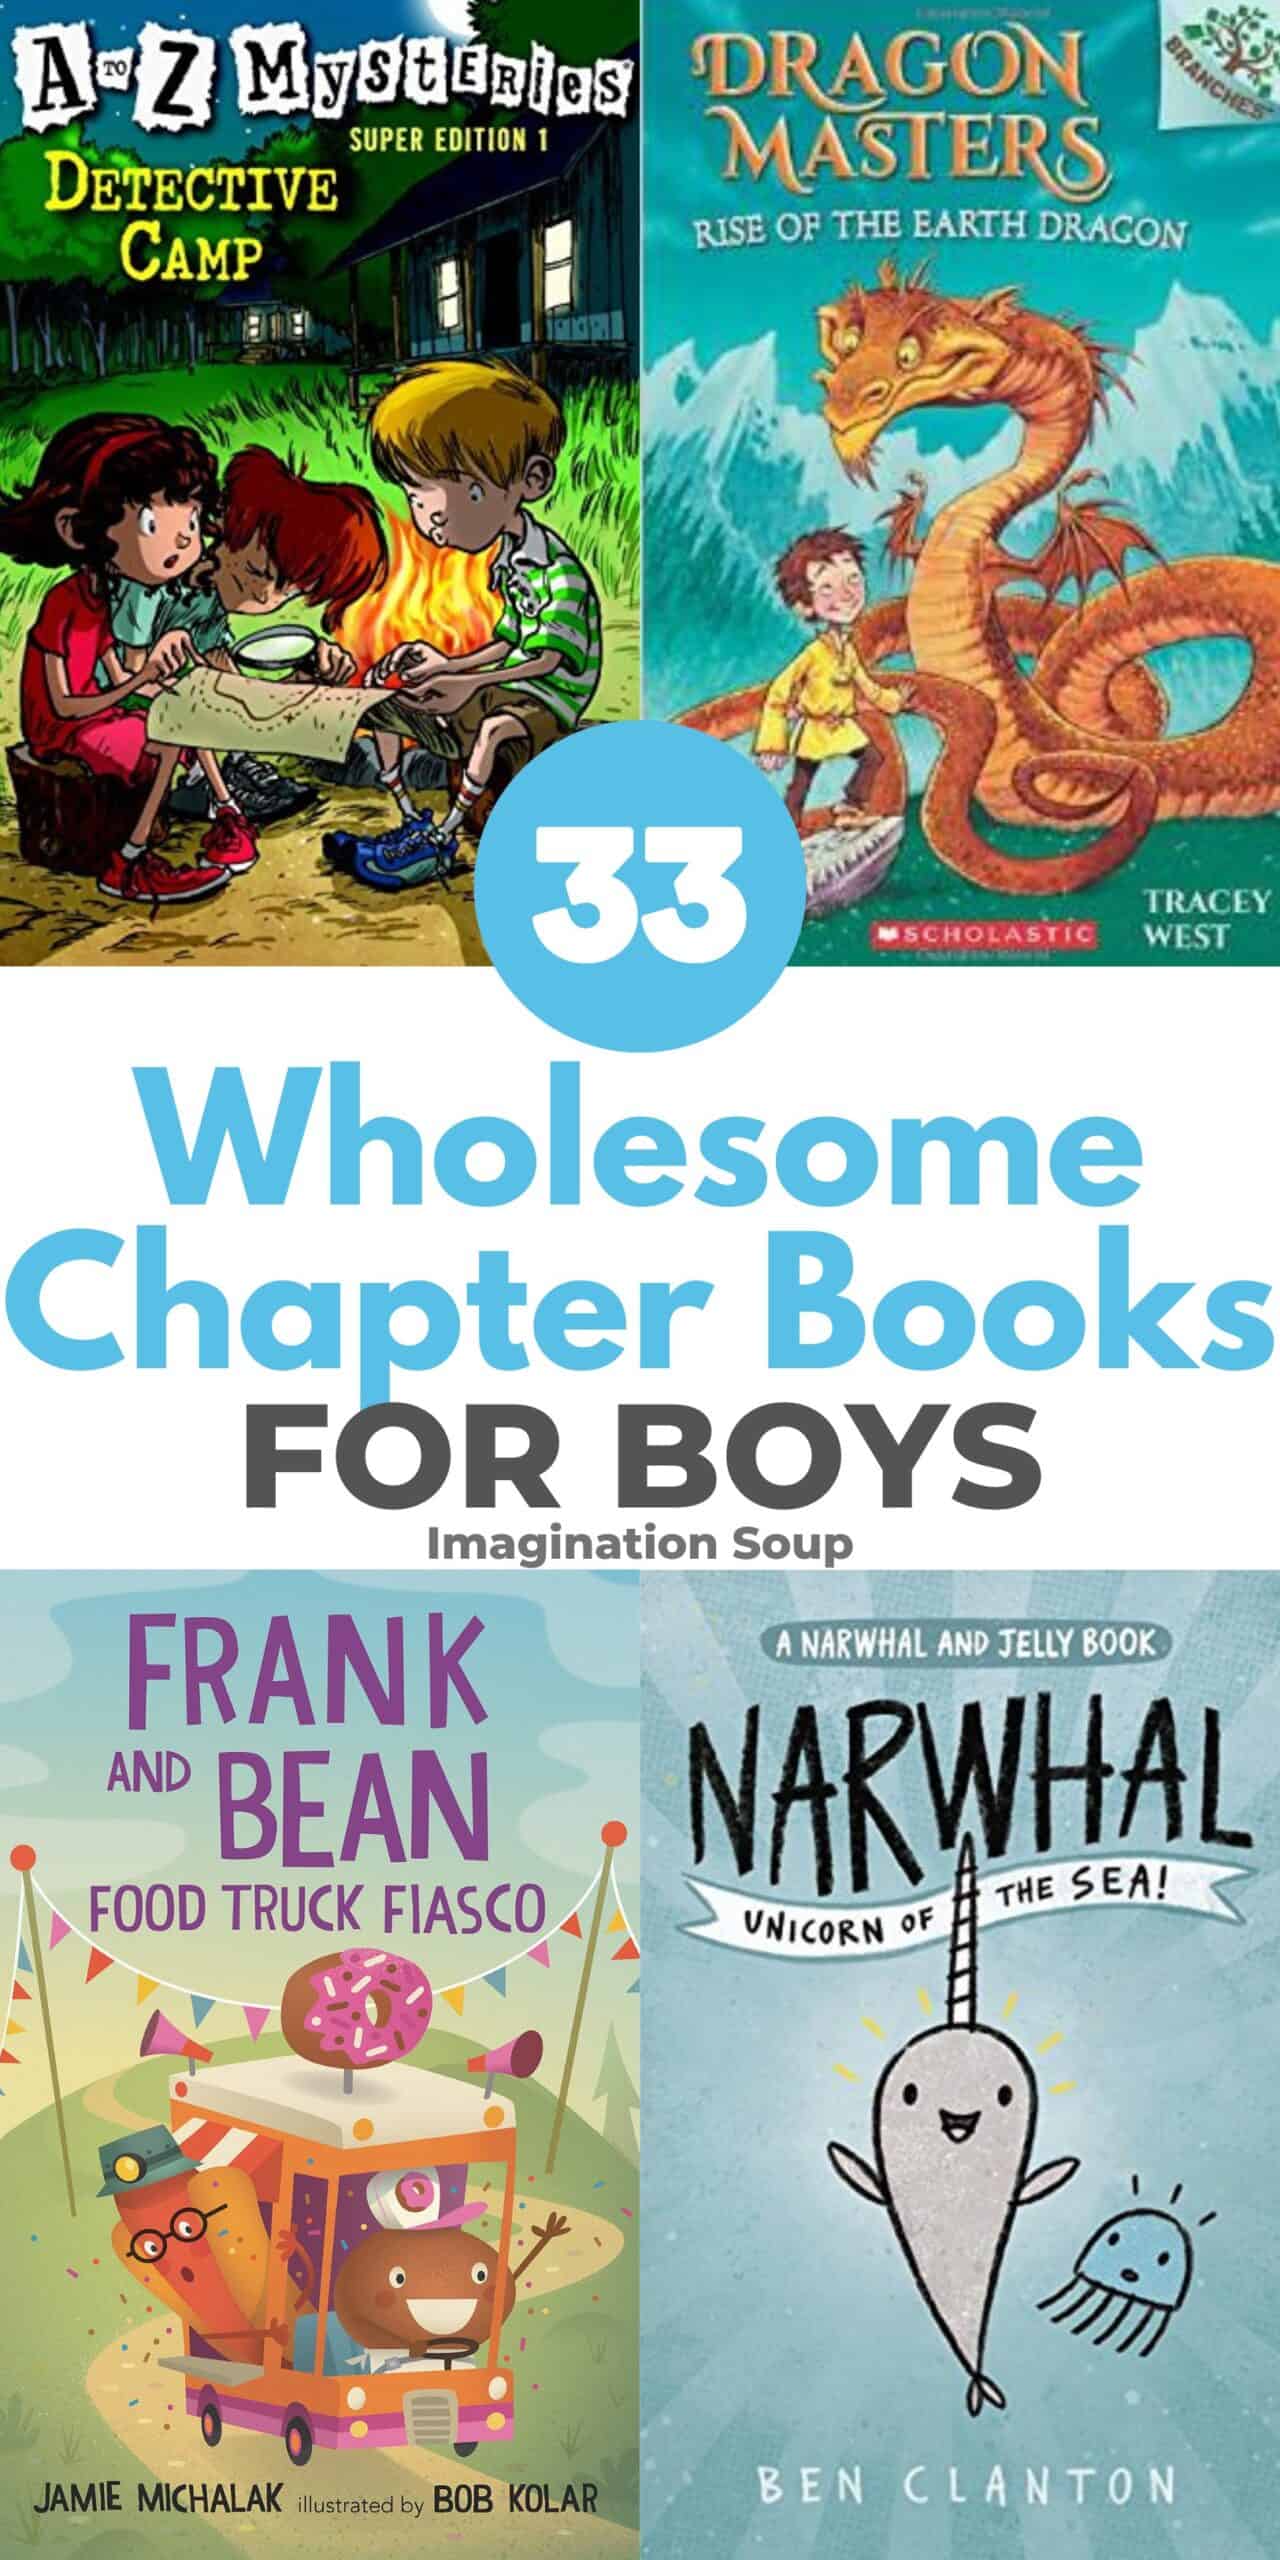 Wholesome chapter books for boys